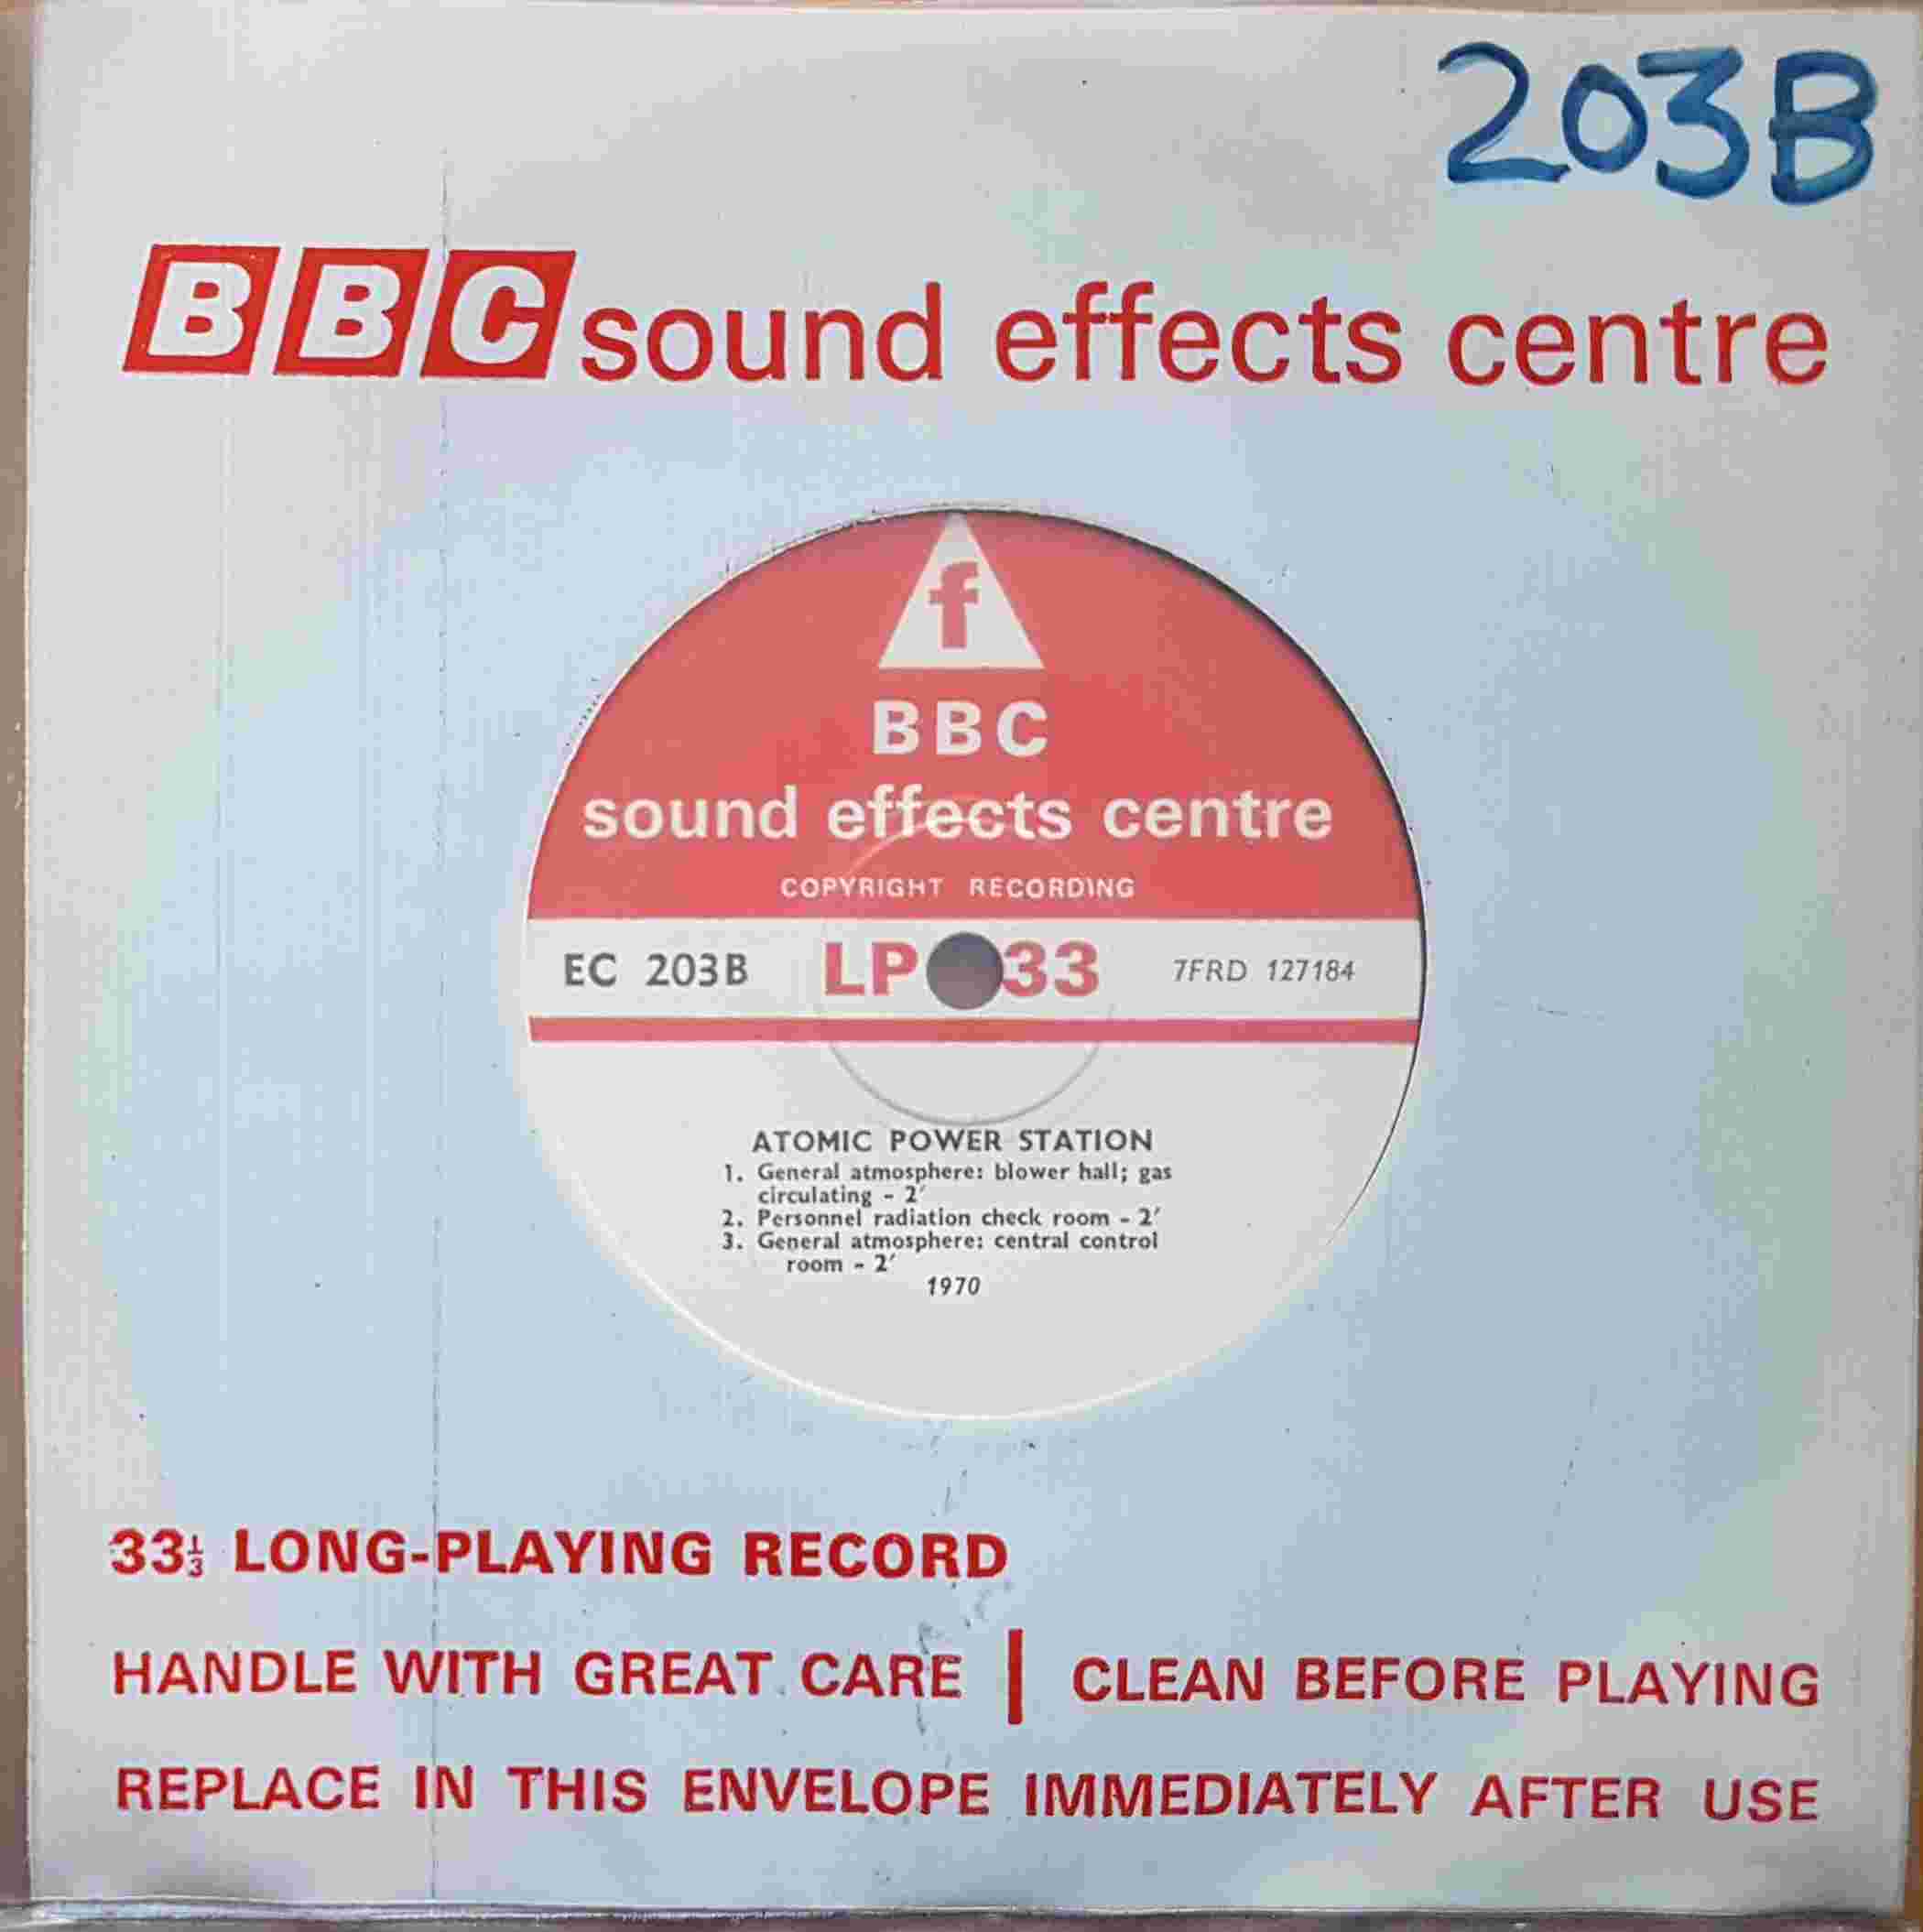 Picture of EC 203B Atomic power station by artist Not registered from the BBC singles - Records and Tapes library